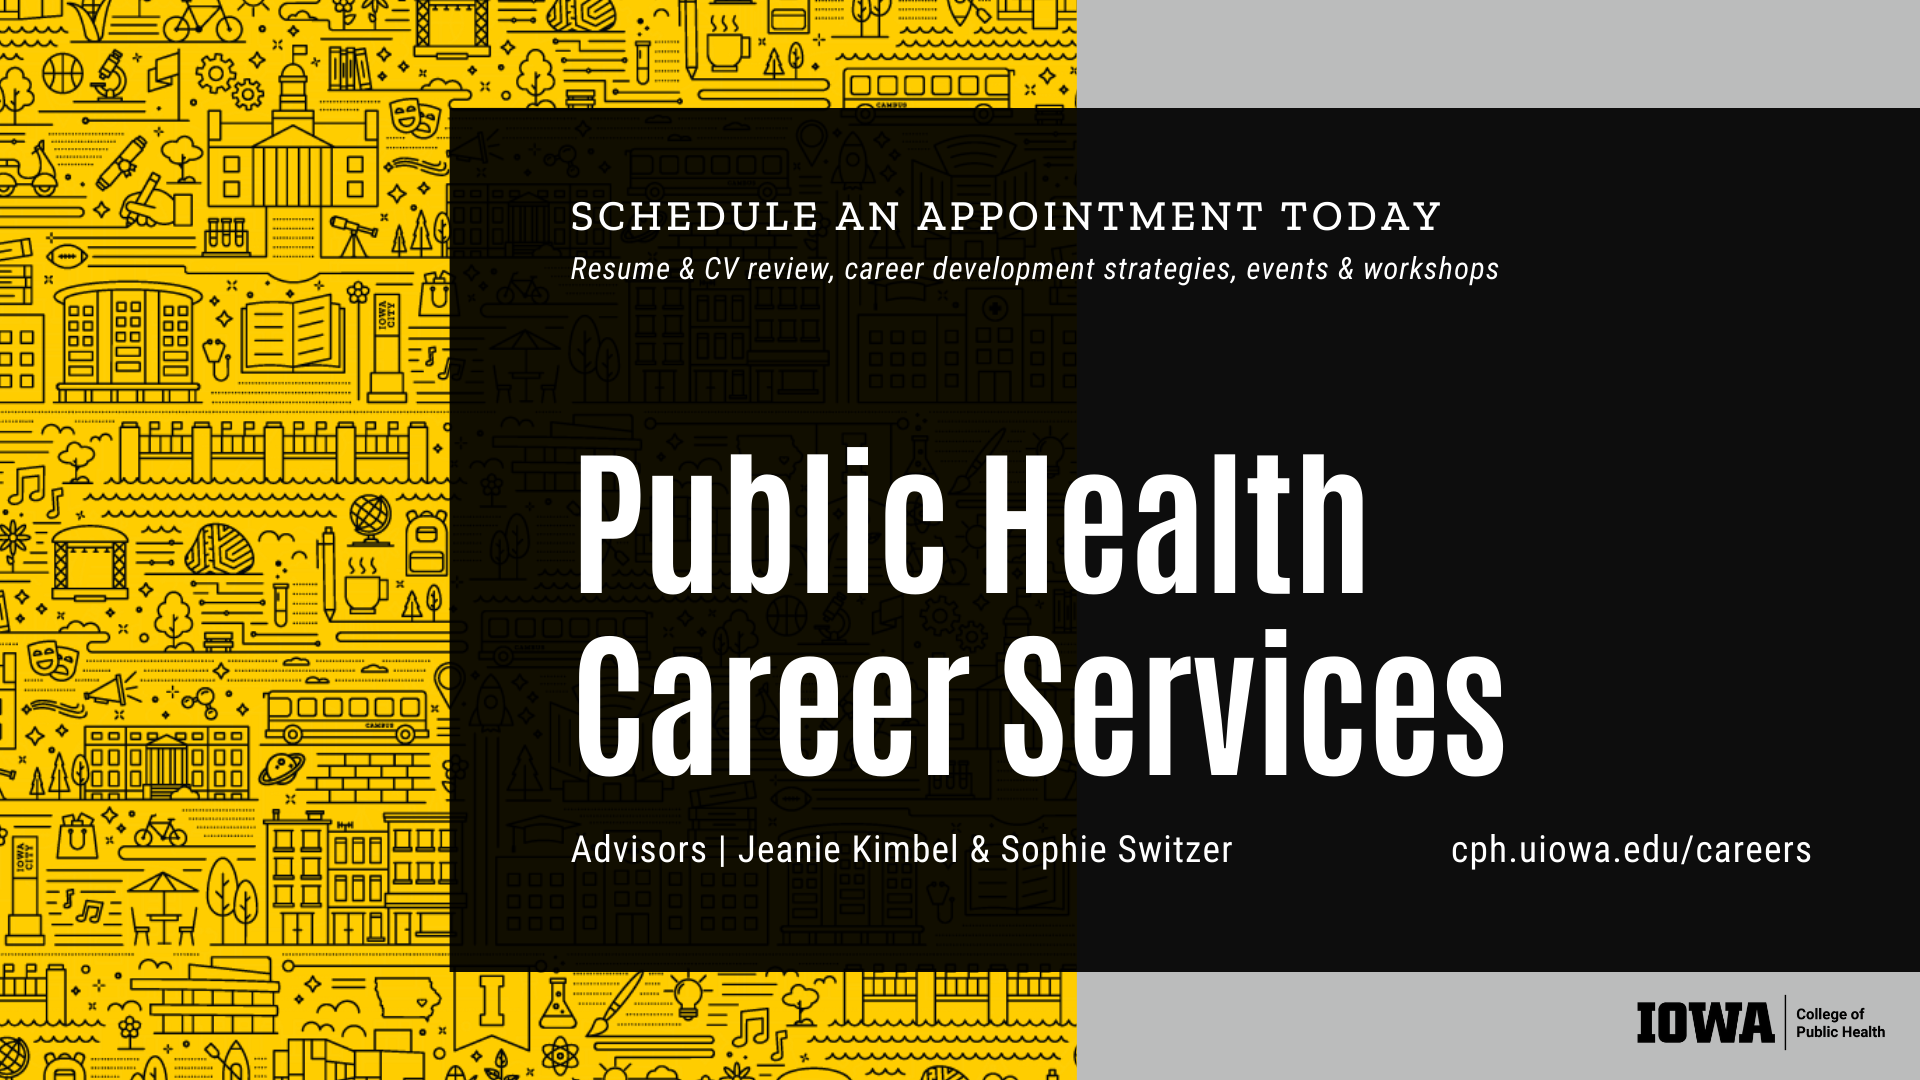 Summary of Career Services Offered in College of Public Health - resume review, career advising, workshops, etc